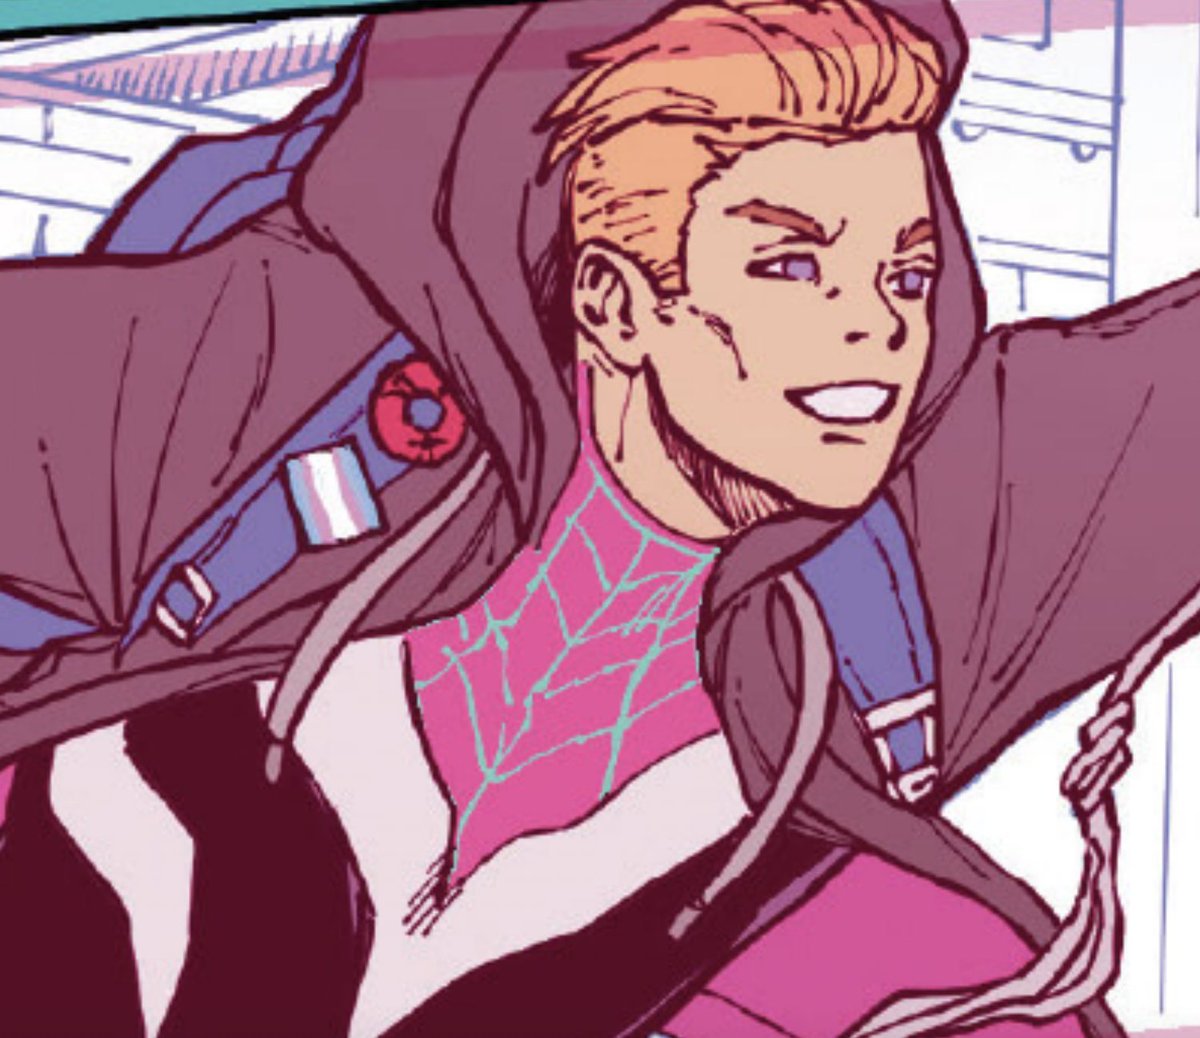 My soul is leaving my body the latest spider-gwen comic has a trans man gwen stacy from the multiverse... imagine the multiverse versions of you that are a trans girl (atsv) and a trans guy (this comic) linking up and going for a coffee